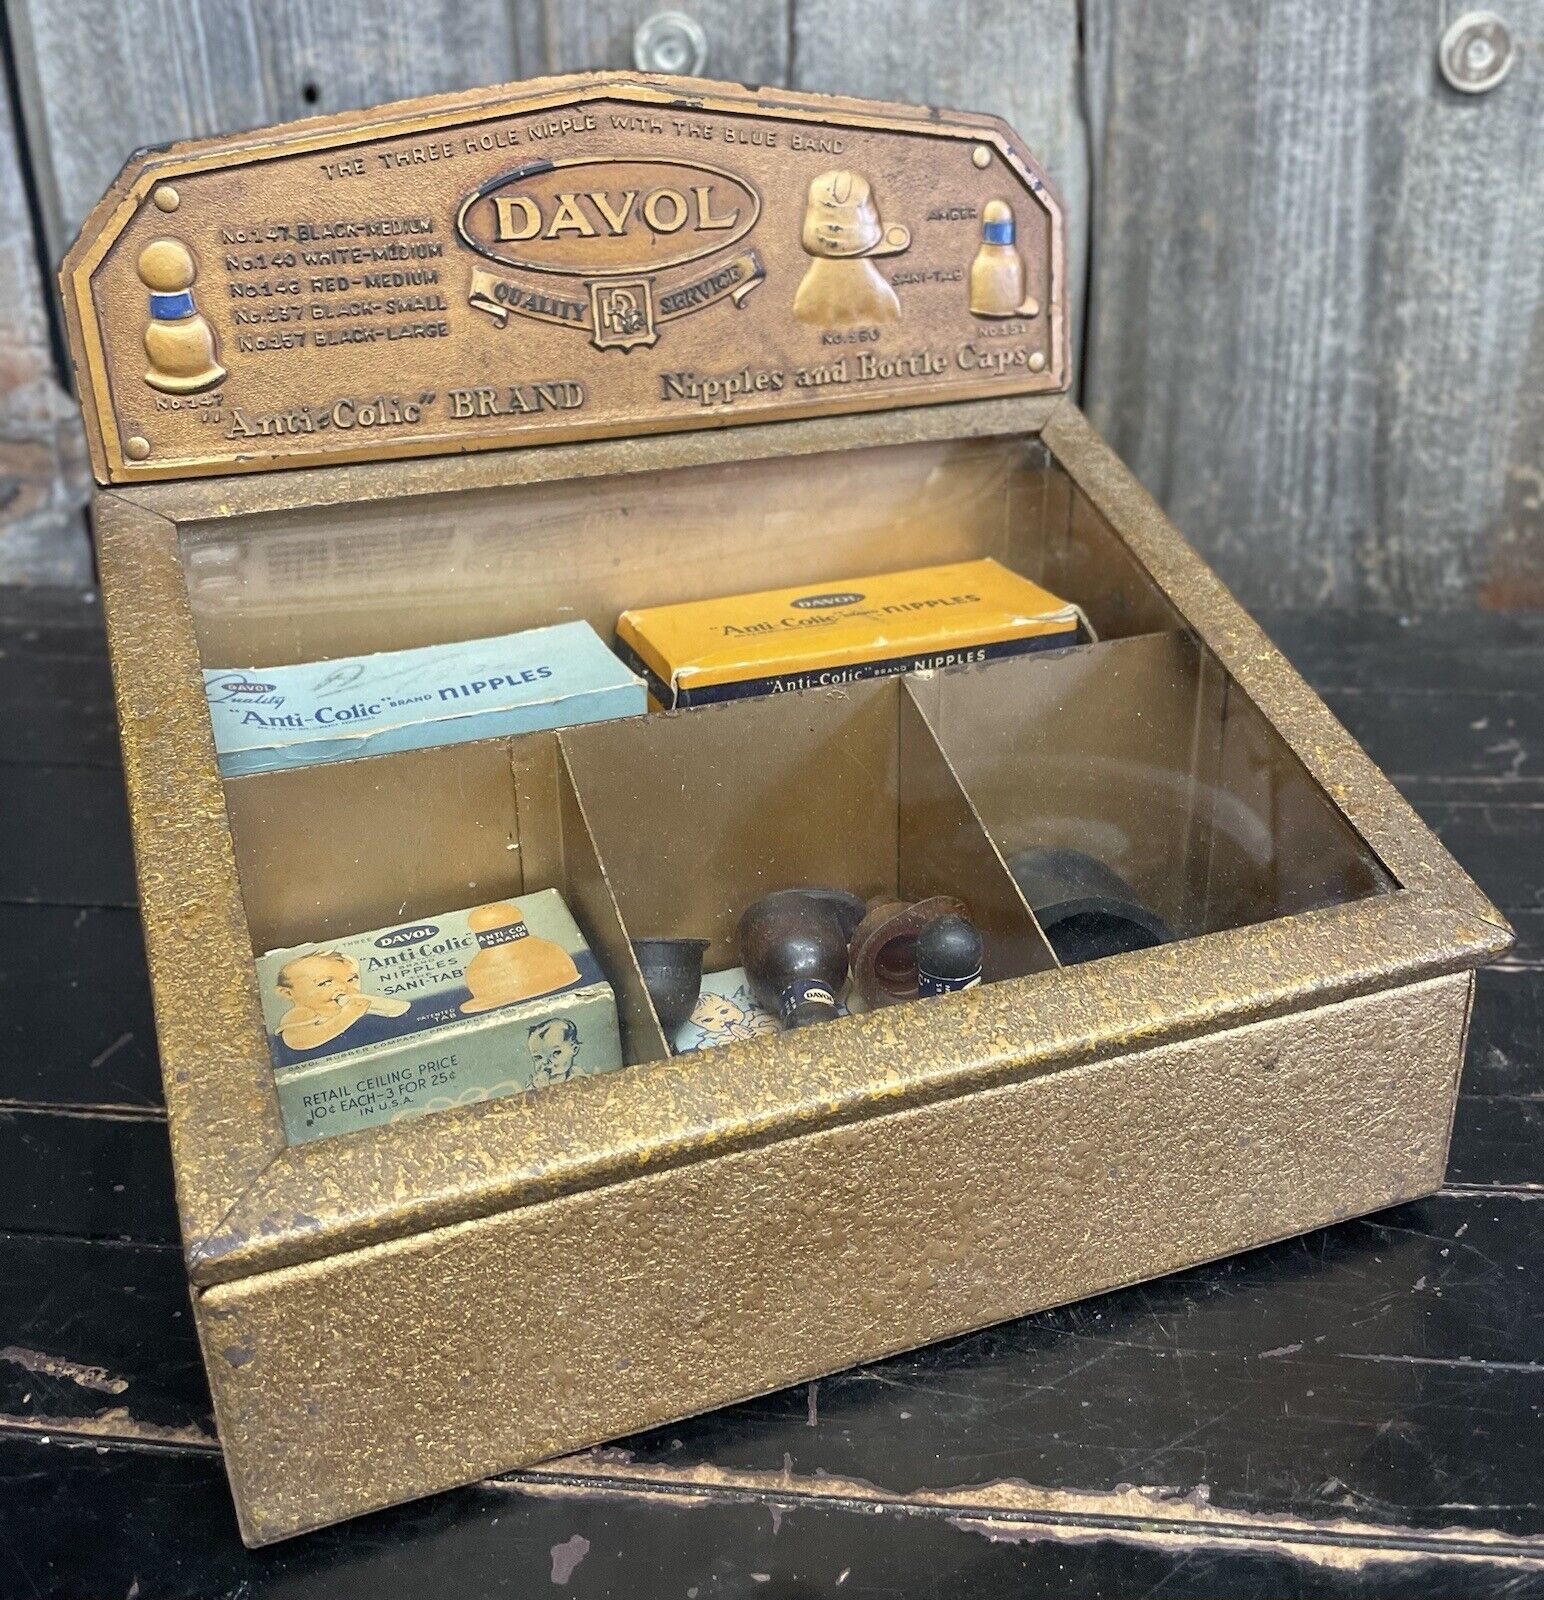 FABULOUS 1940s Davol Bottle Cap Display Case Content COUNTRY STORE DRUGSTORE 🔥